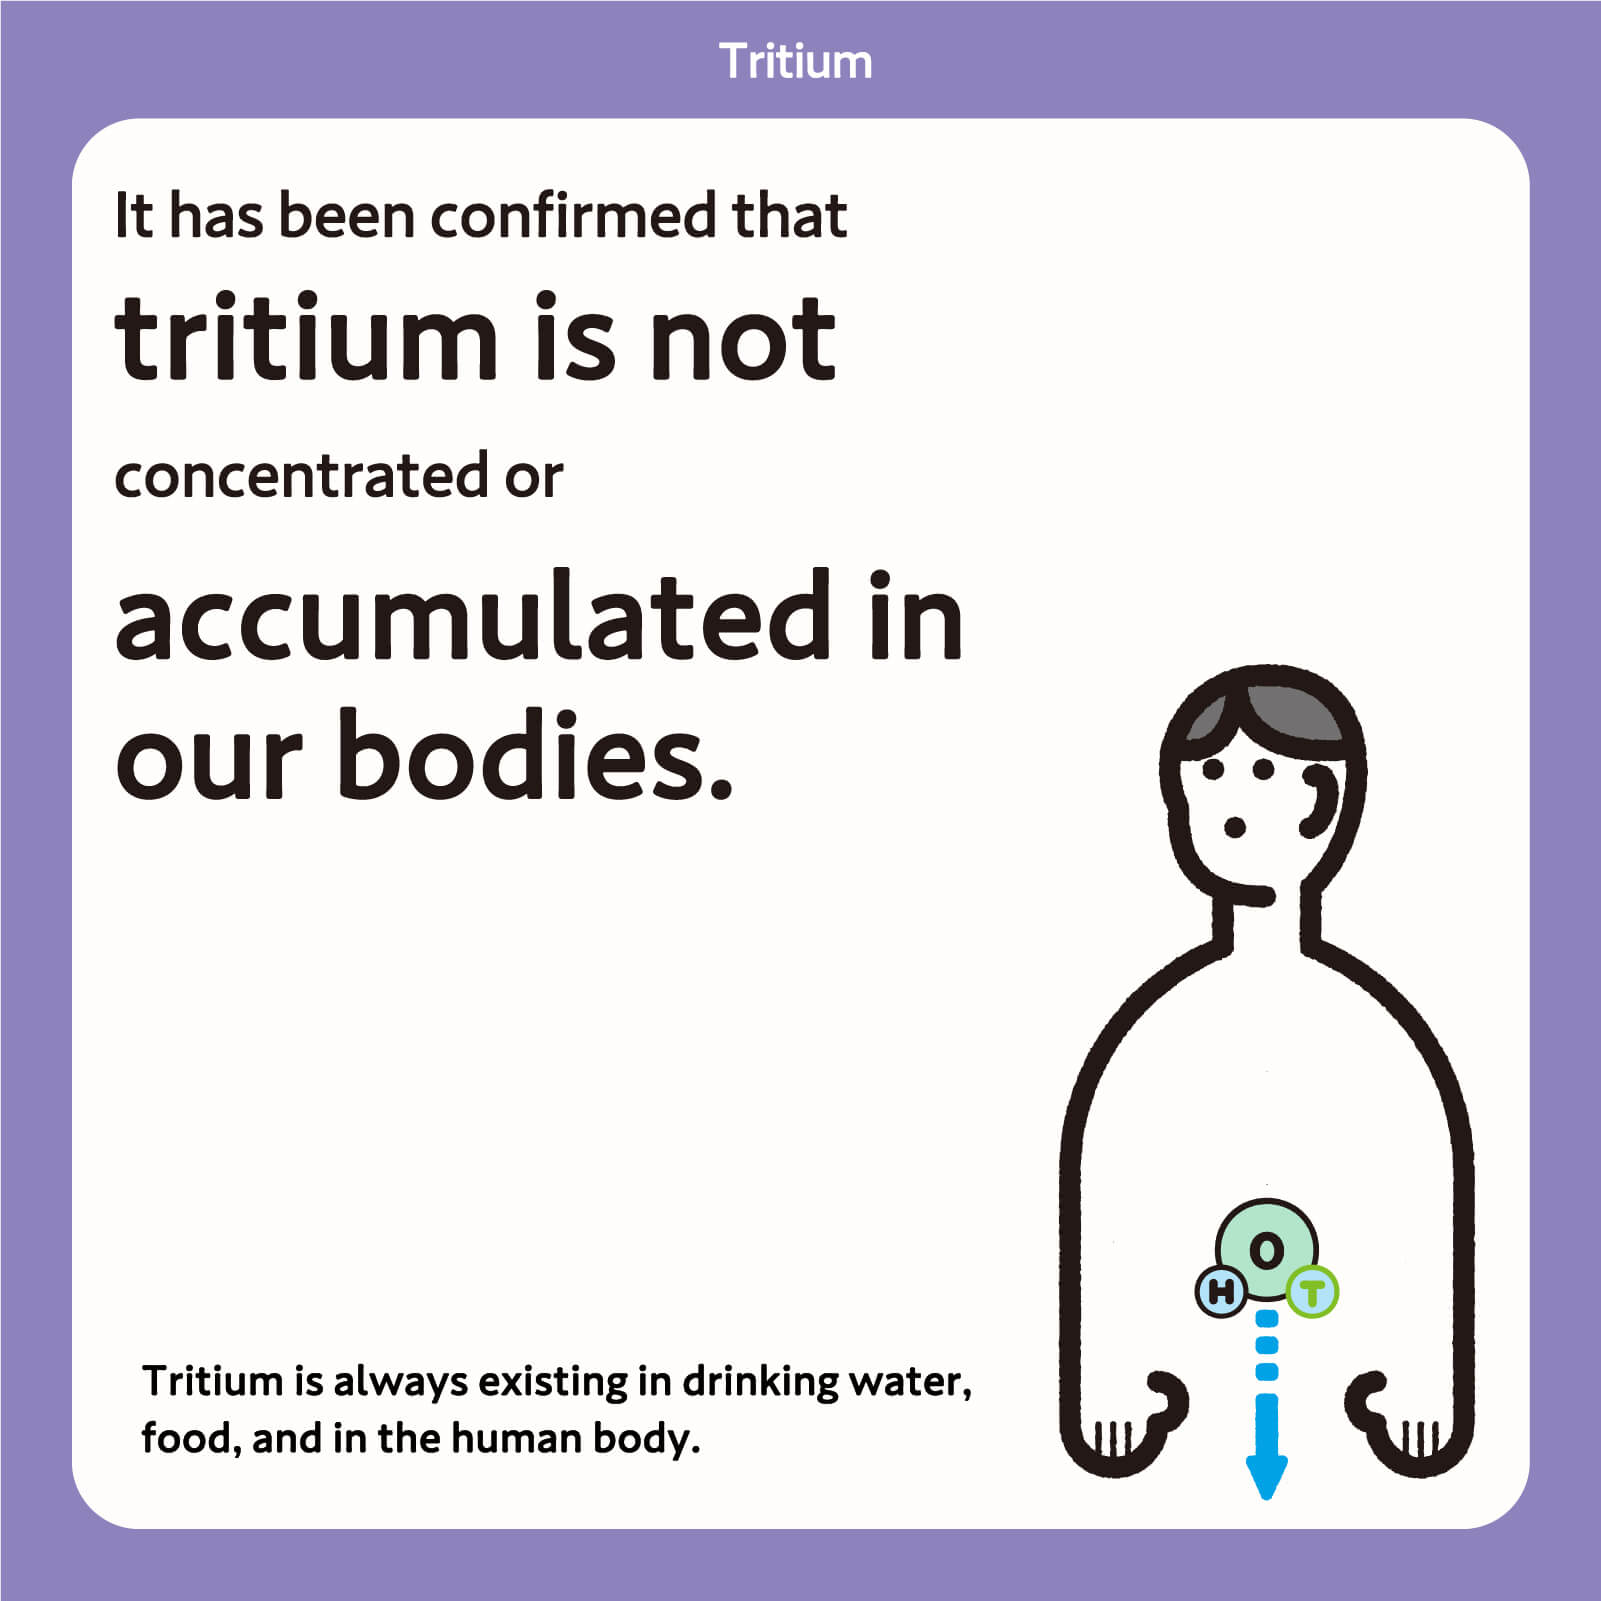 It has been confirmed that tritium is not concentrated or accumulated in our bodies.